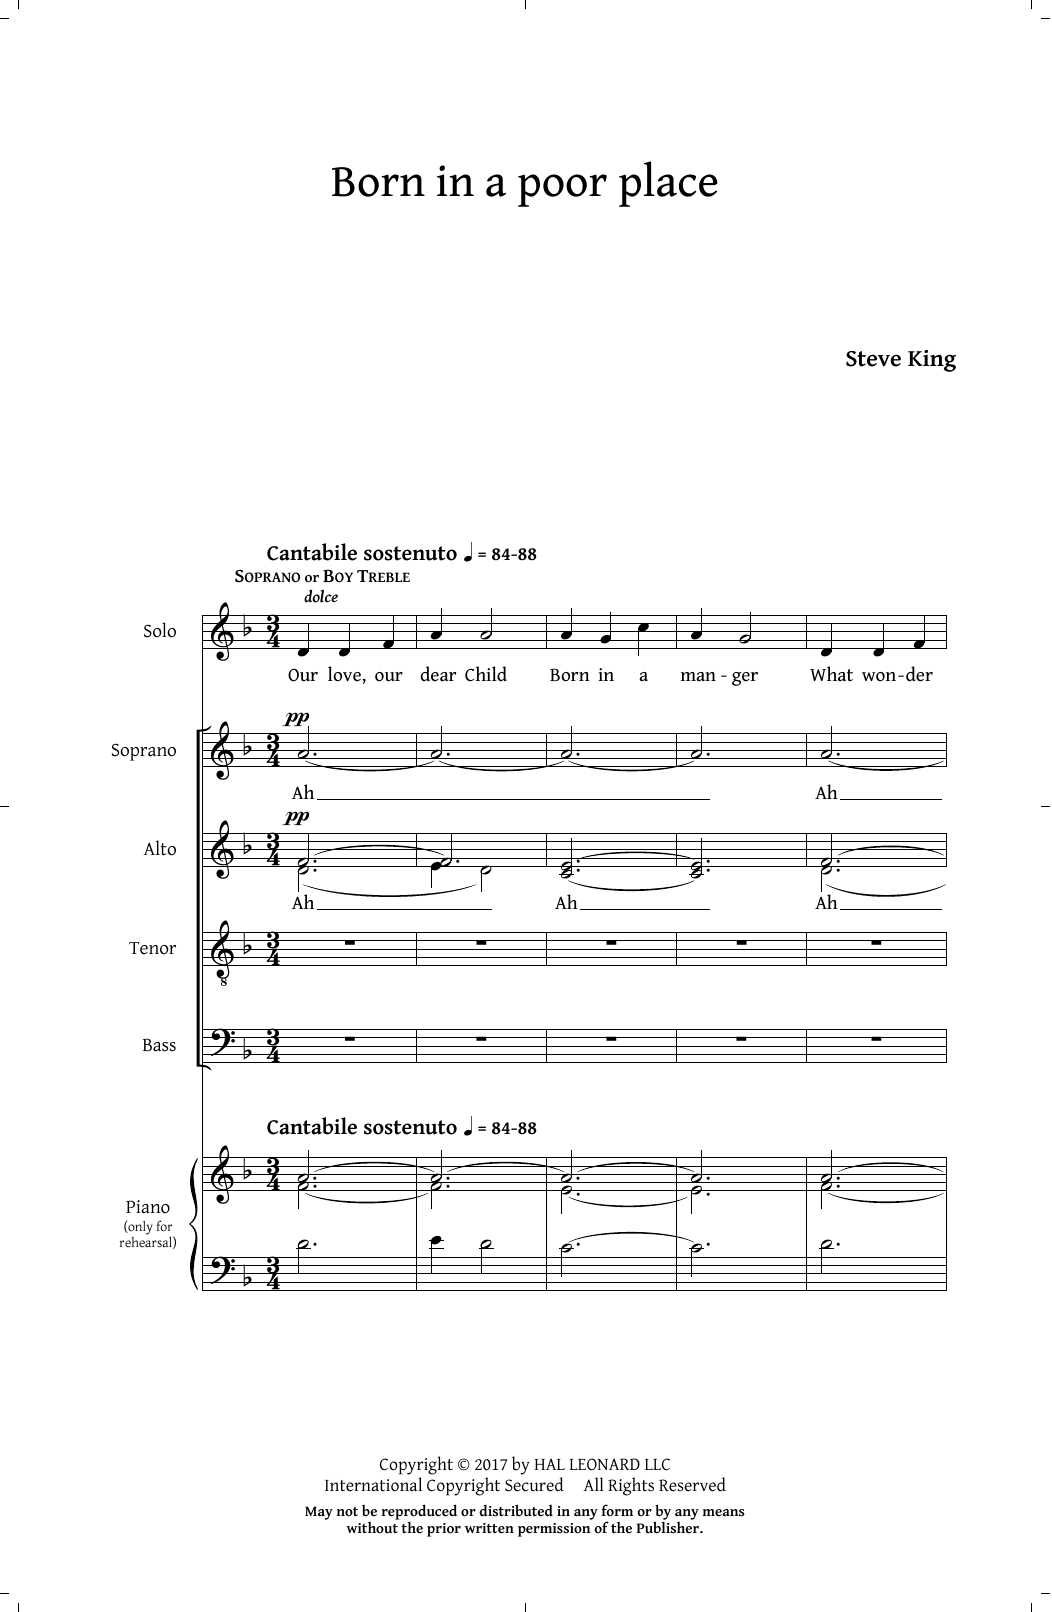 Download Steve King Born In A Poor Place Sheet Music